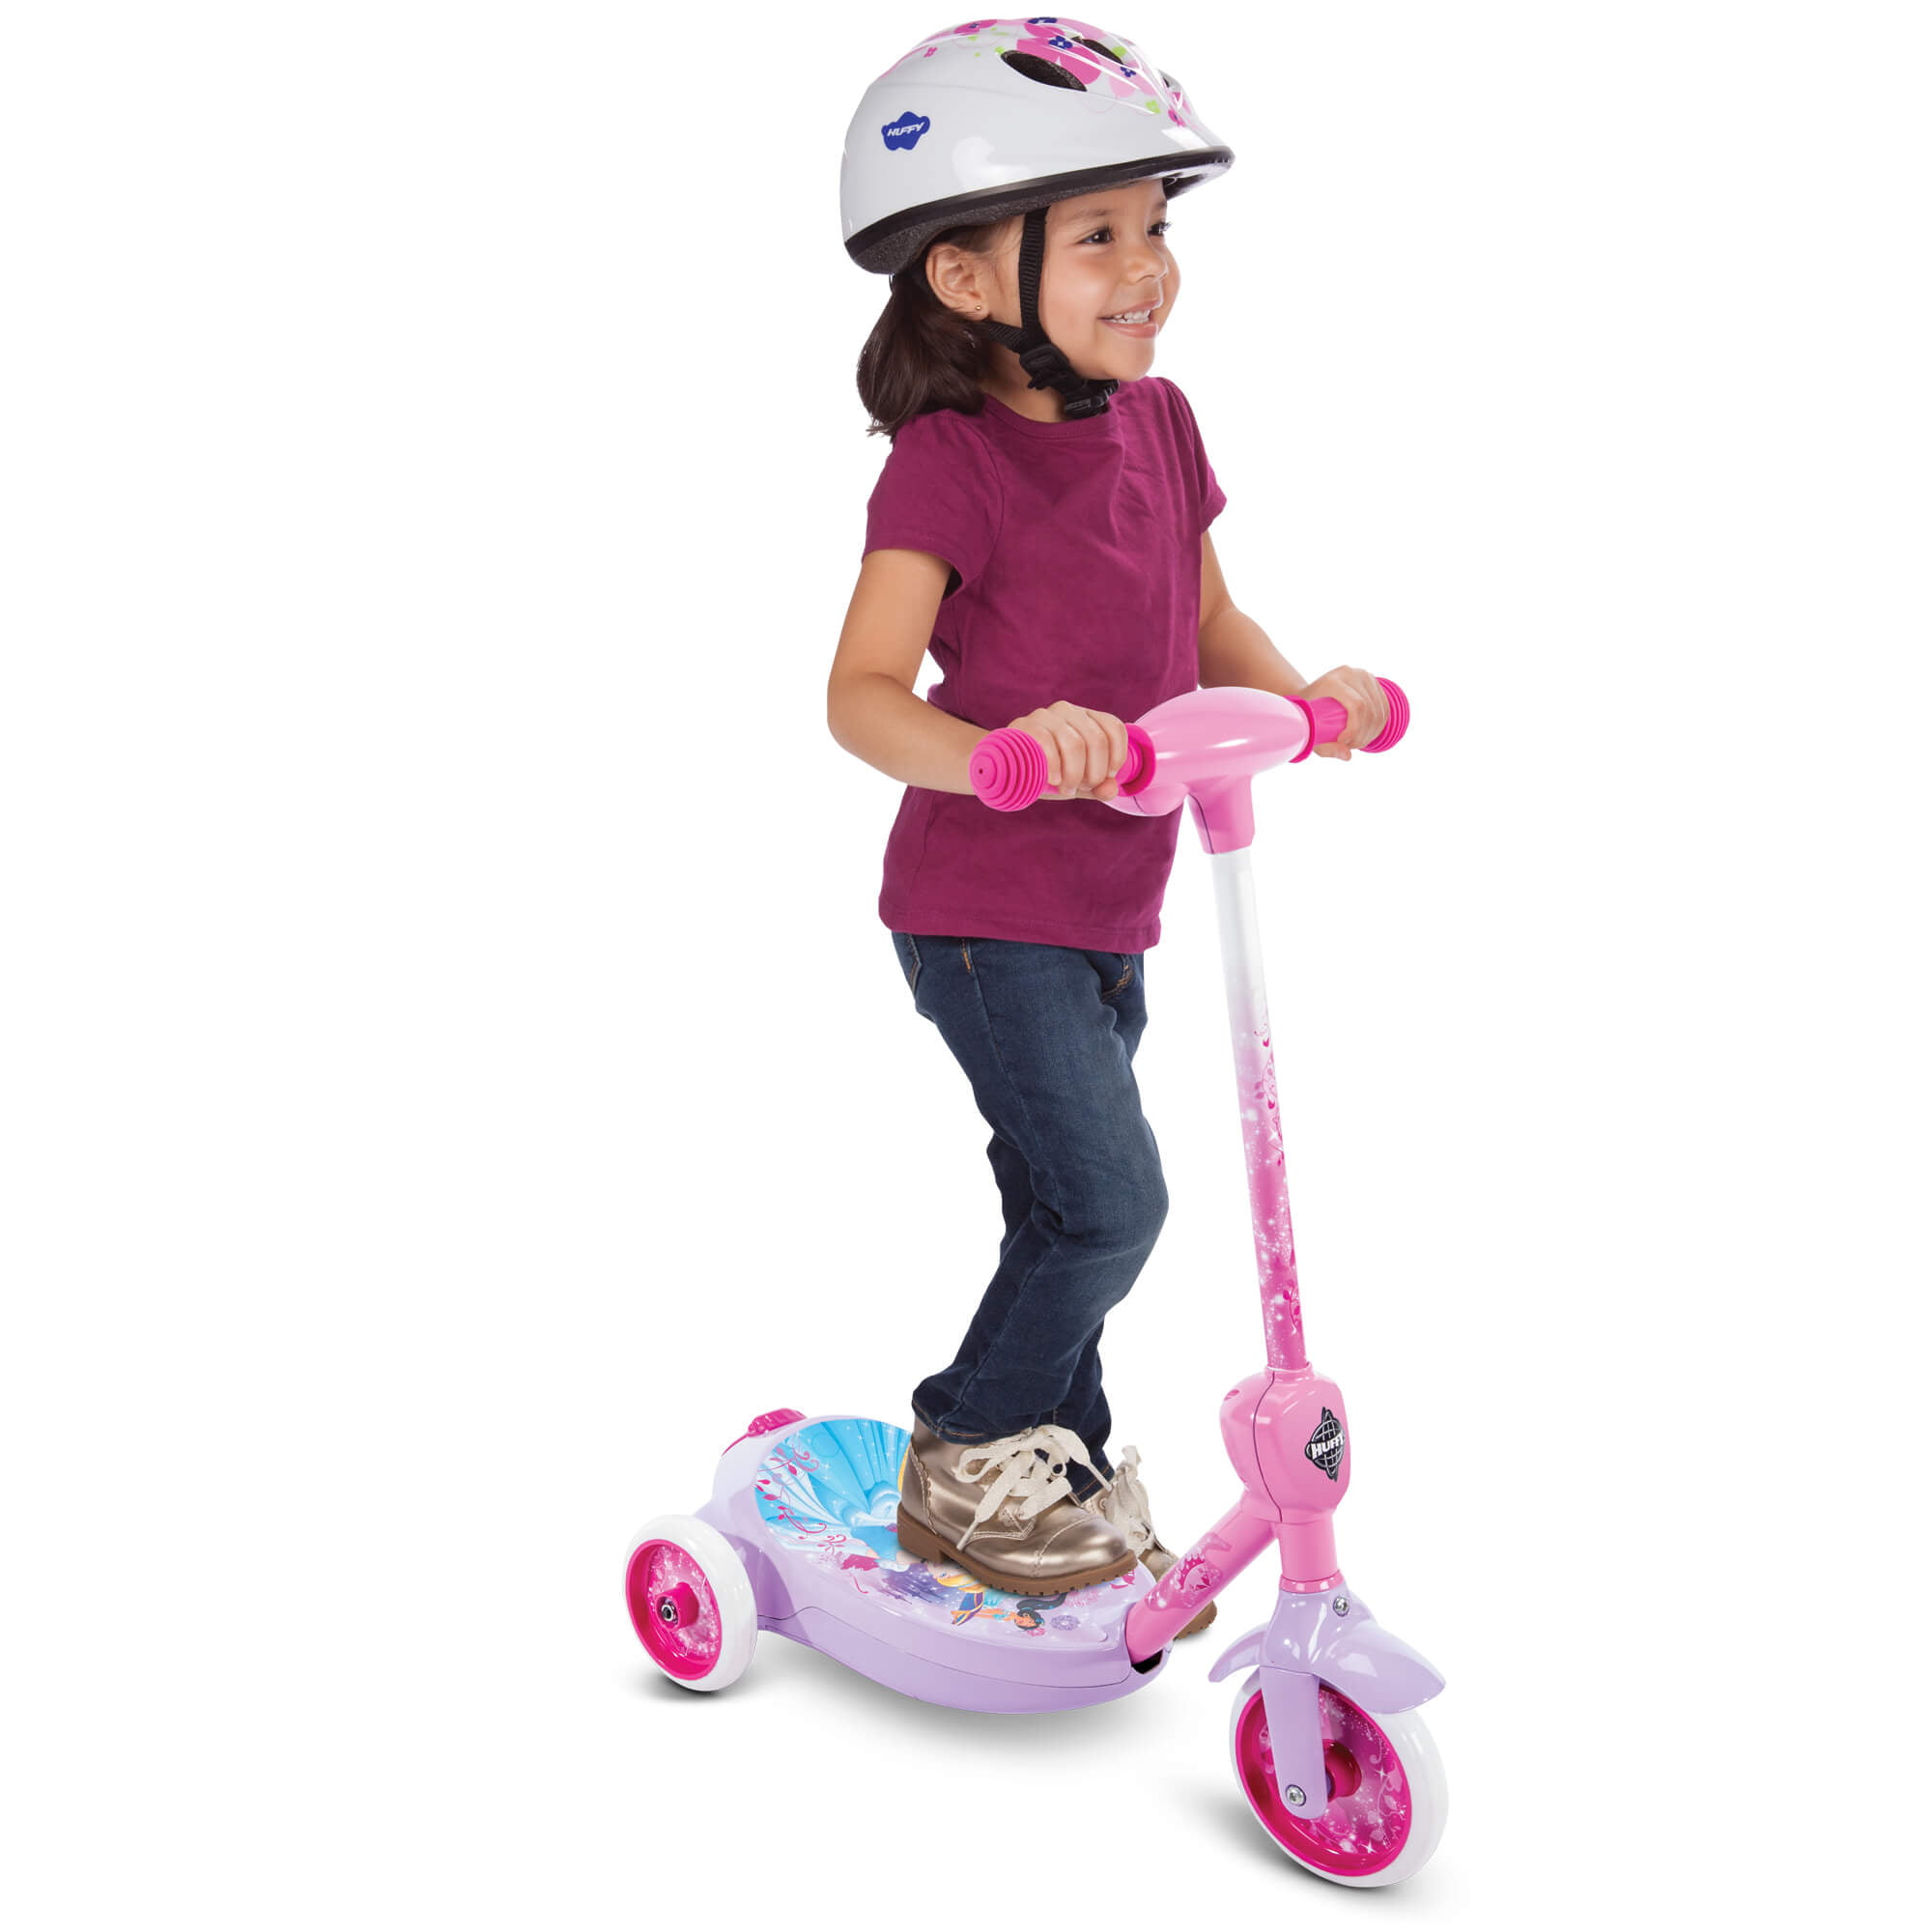 electric scooty for girls